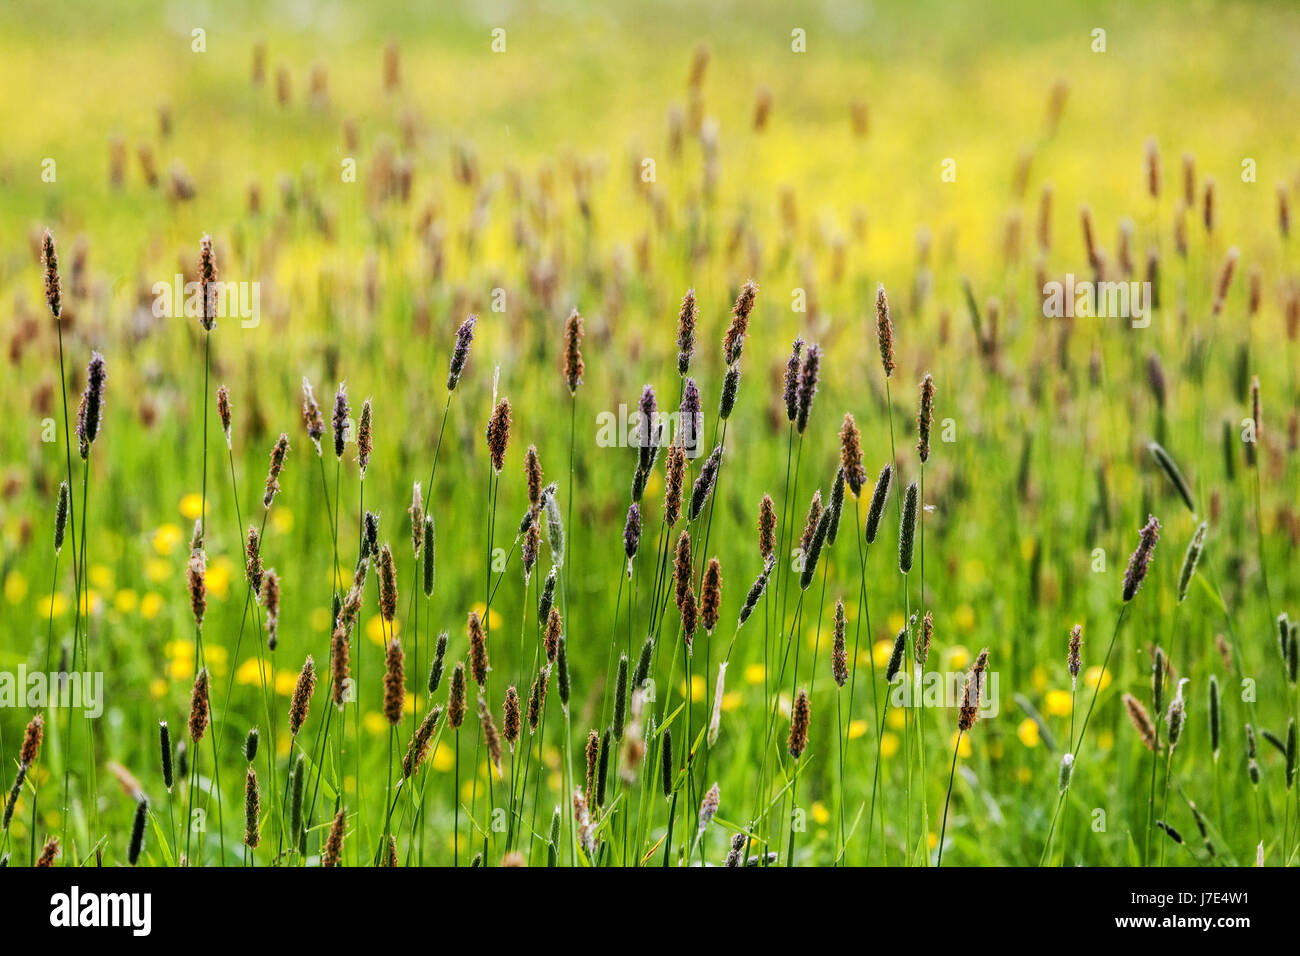 Meadow foxtail Grass Alopecurus pratensis Flowering Colorful Meadow European grass field May Long grass meadow Spring Grassland Blooming Alopecurus Stock Photo